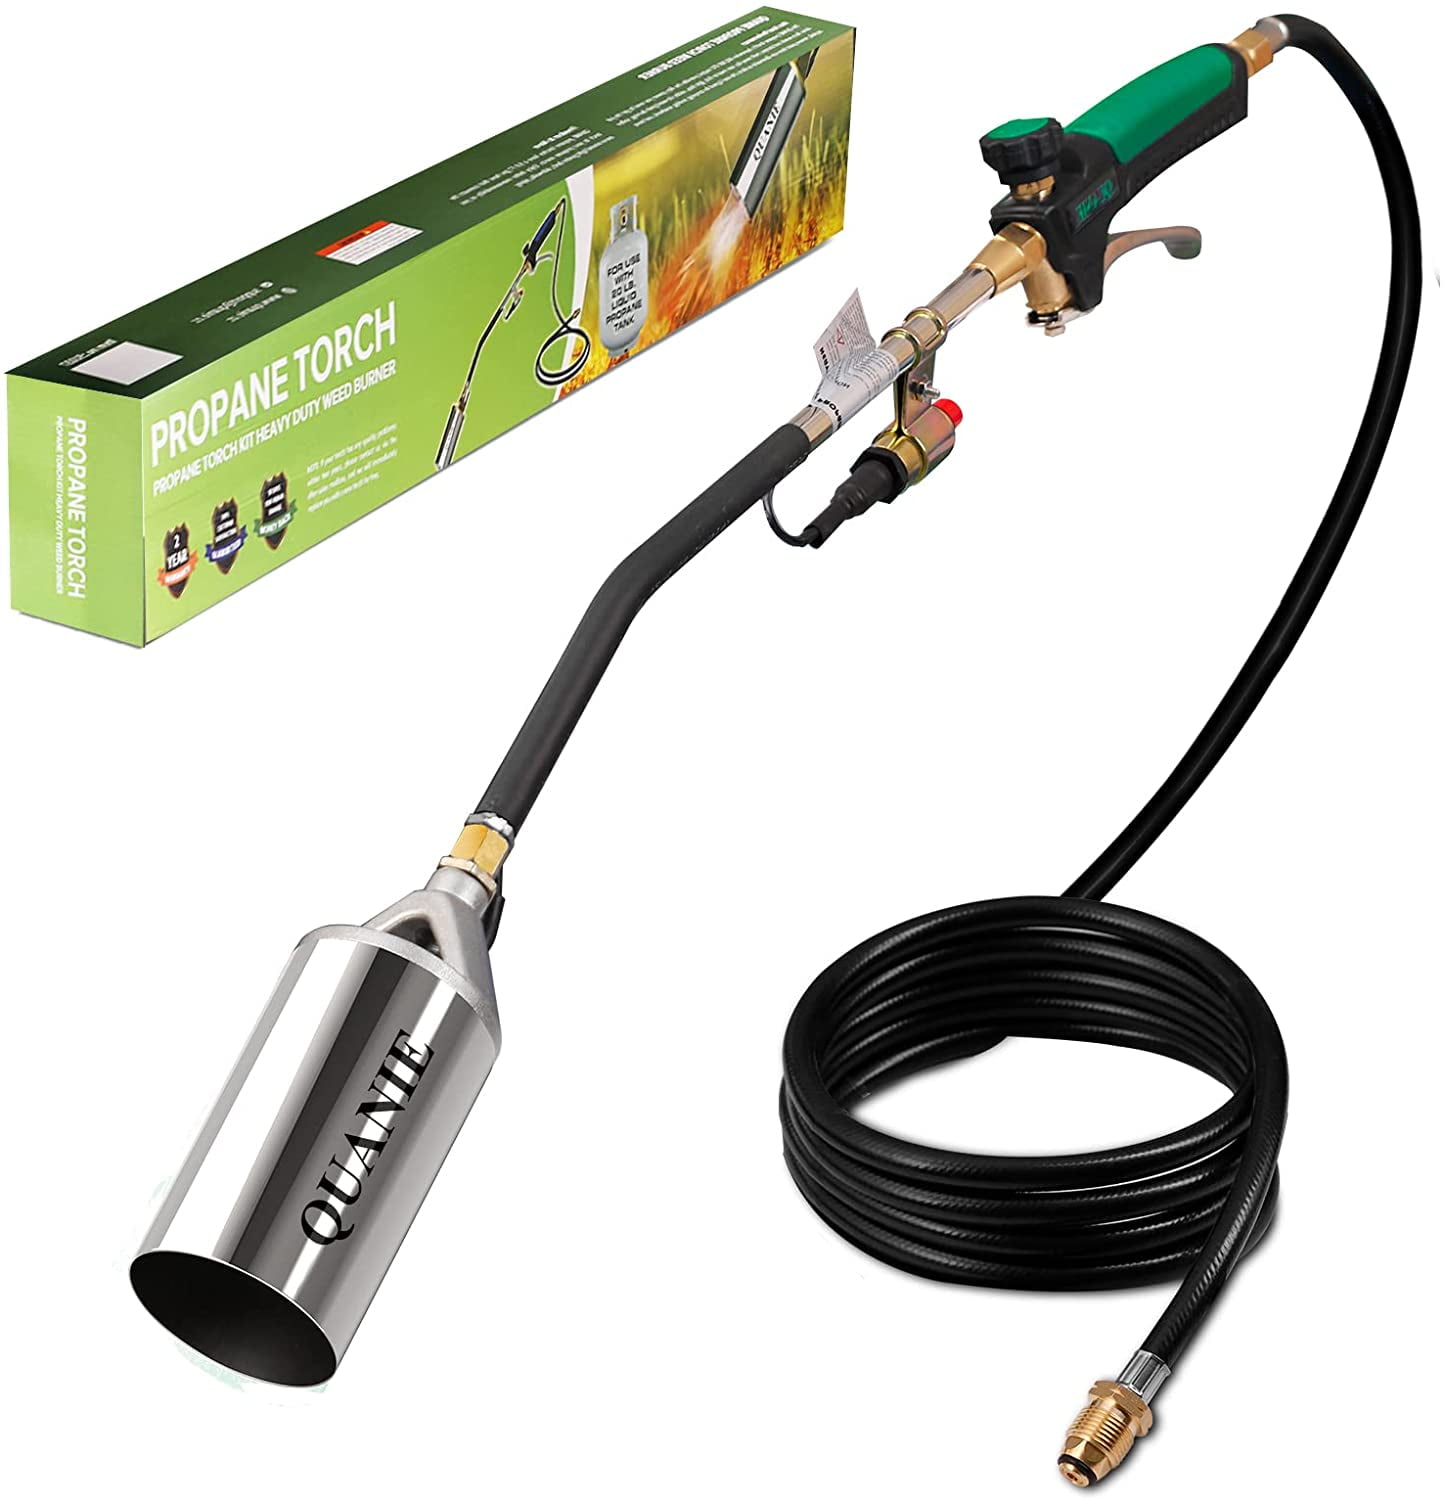 Propane Torch Weed Burner,Blow Torch,Heavy Duty,High Output 700,000 BTU,Flamethrower with Turbo Trigger Push Button Igniter and 9.8 FT Hose for Roof Asphalt,Ice Snow,Road Marking,Charcoal 